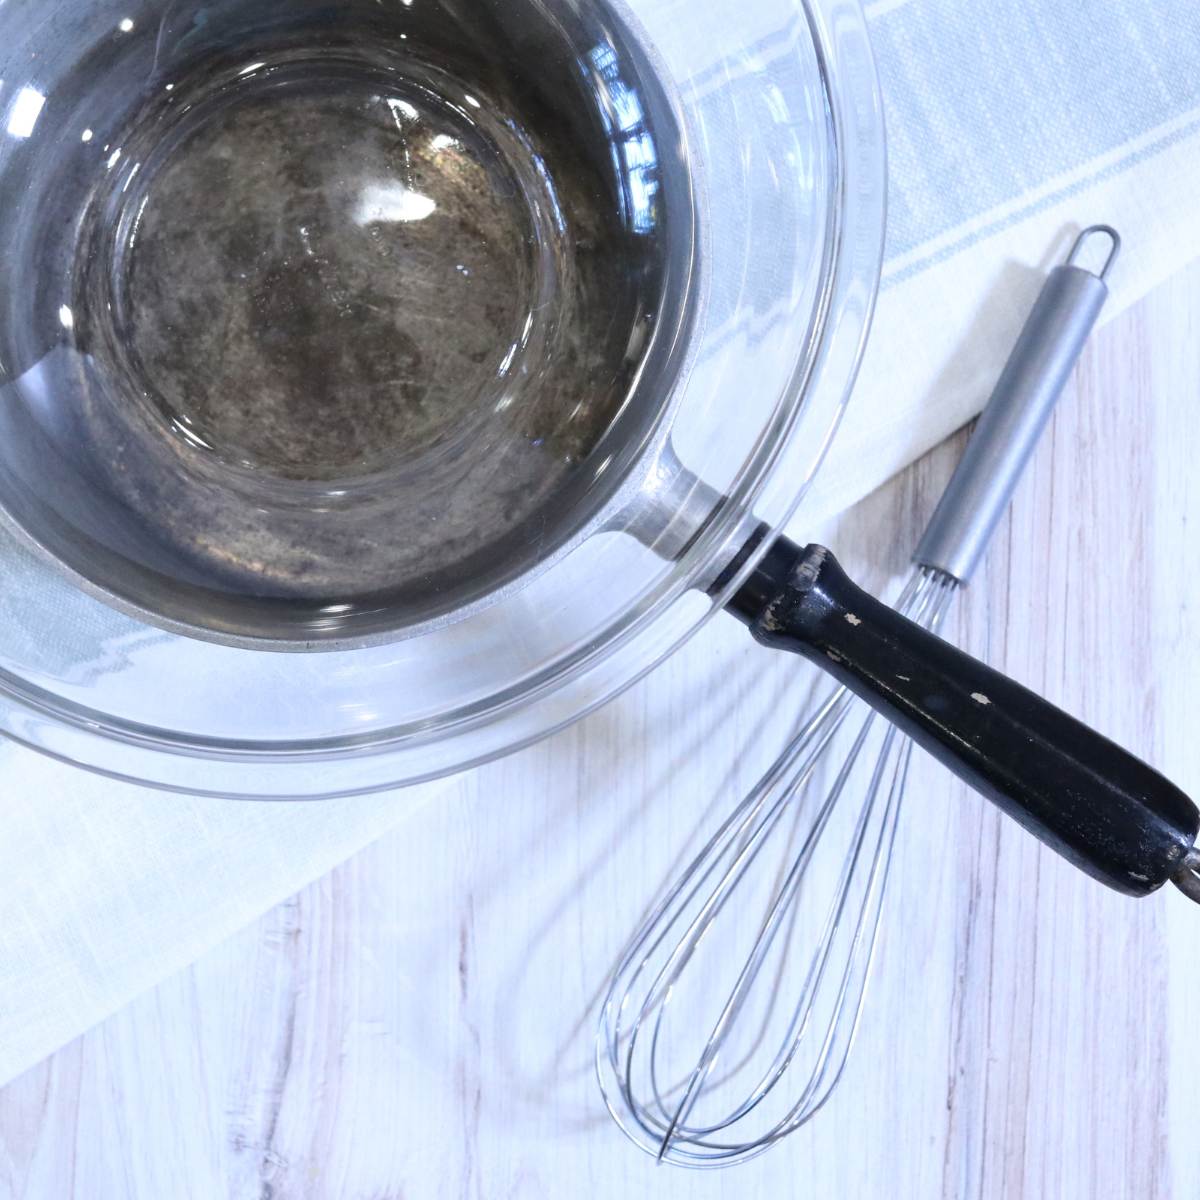 A homemade double boiler can be easily made using a pot with a glass bowl resting on top. A metal whisk can be seen sitting next to the double boiler pot being used for a homemade vapor rub recipe.